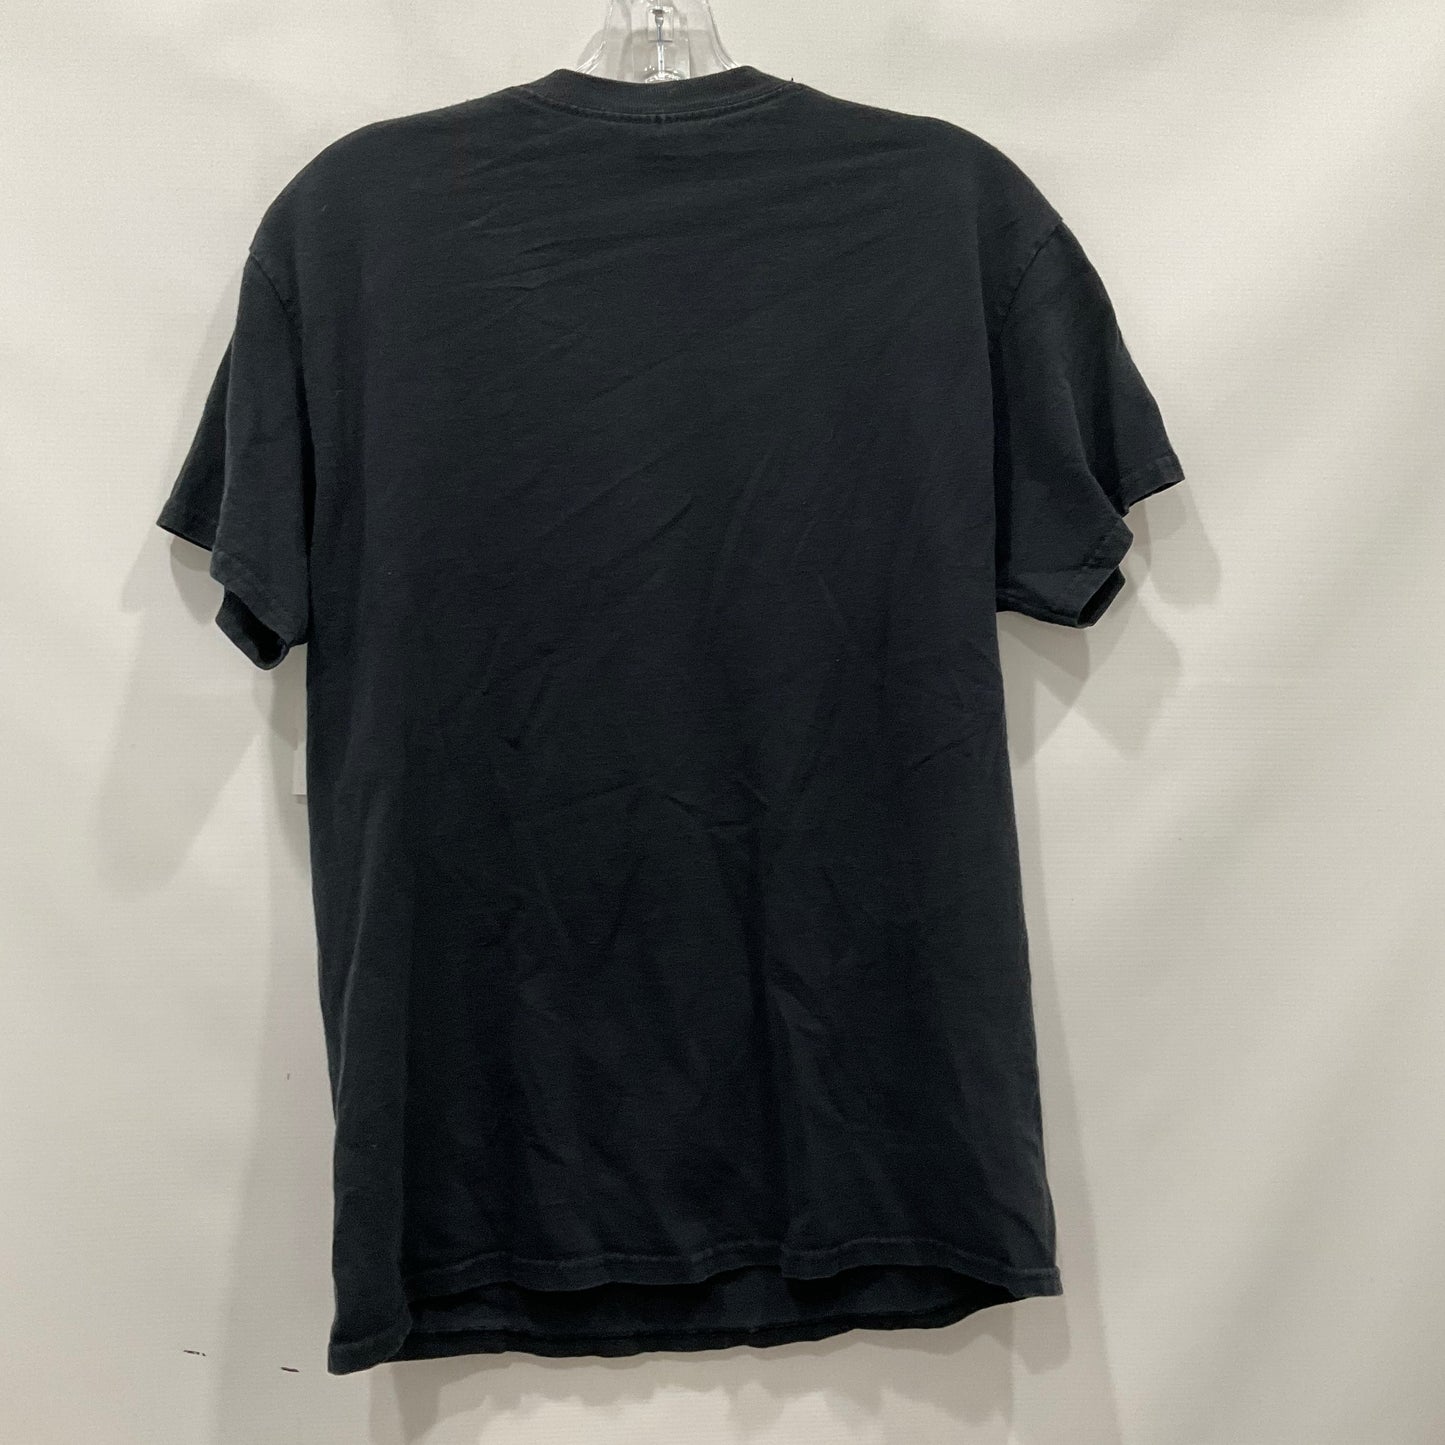 Black Top Short Sleeve Clothes Mentor, Size M